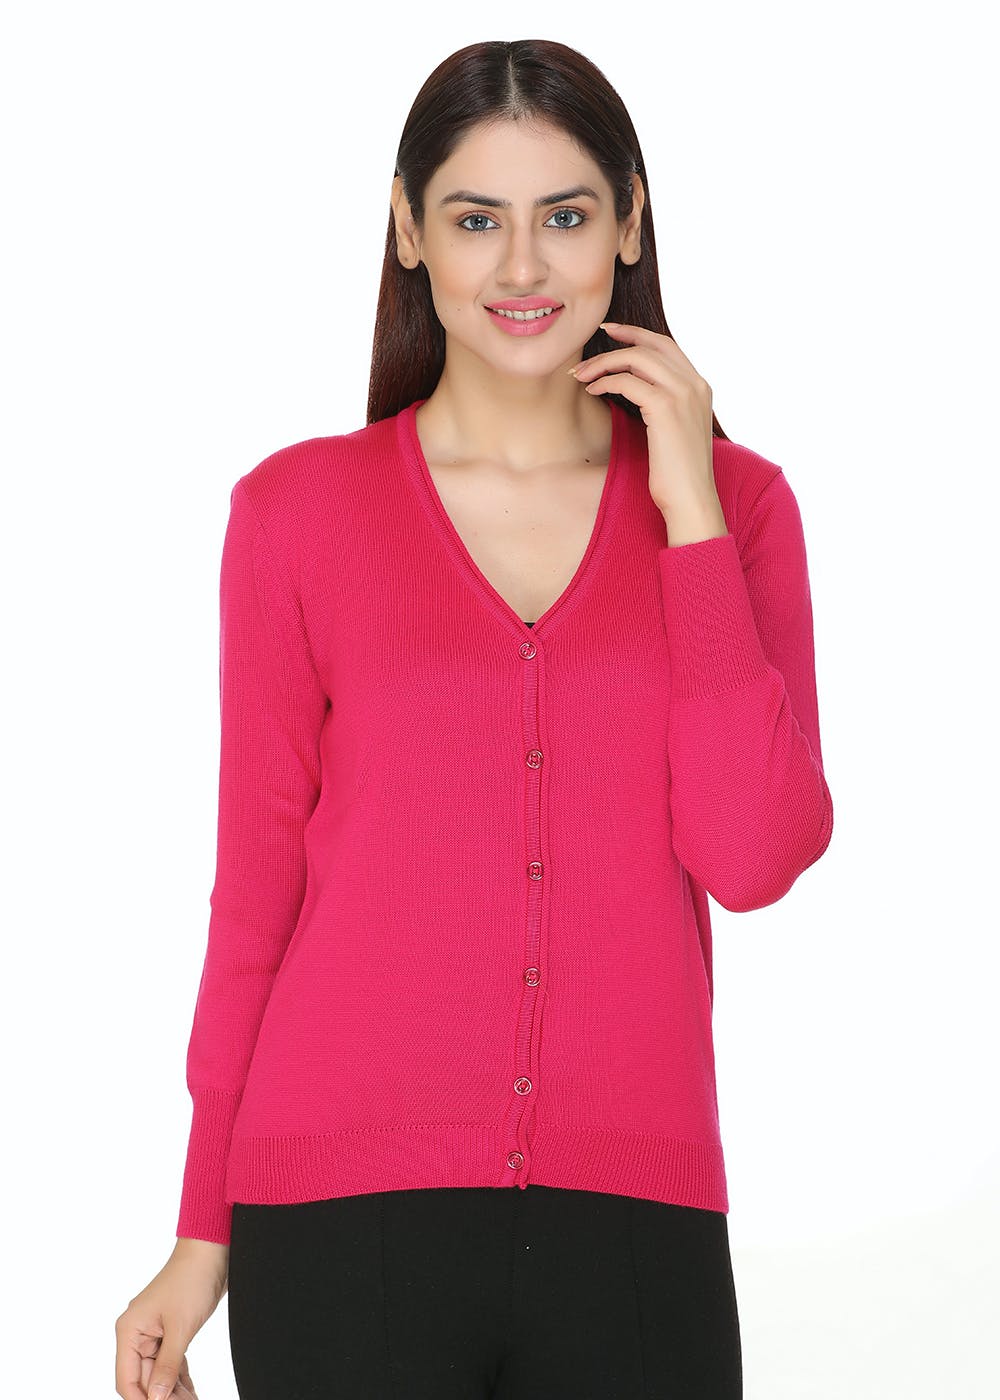 Solid Basic Knit Button Down Cardigan (Freesize) - Pink